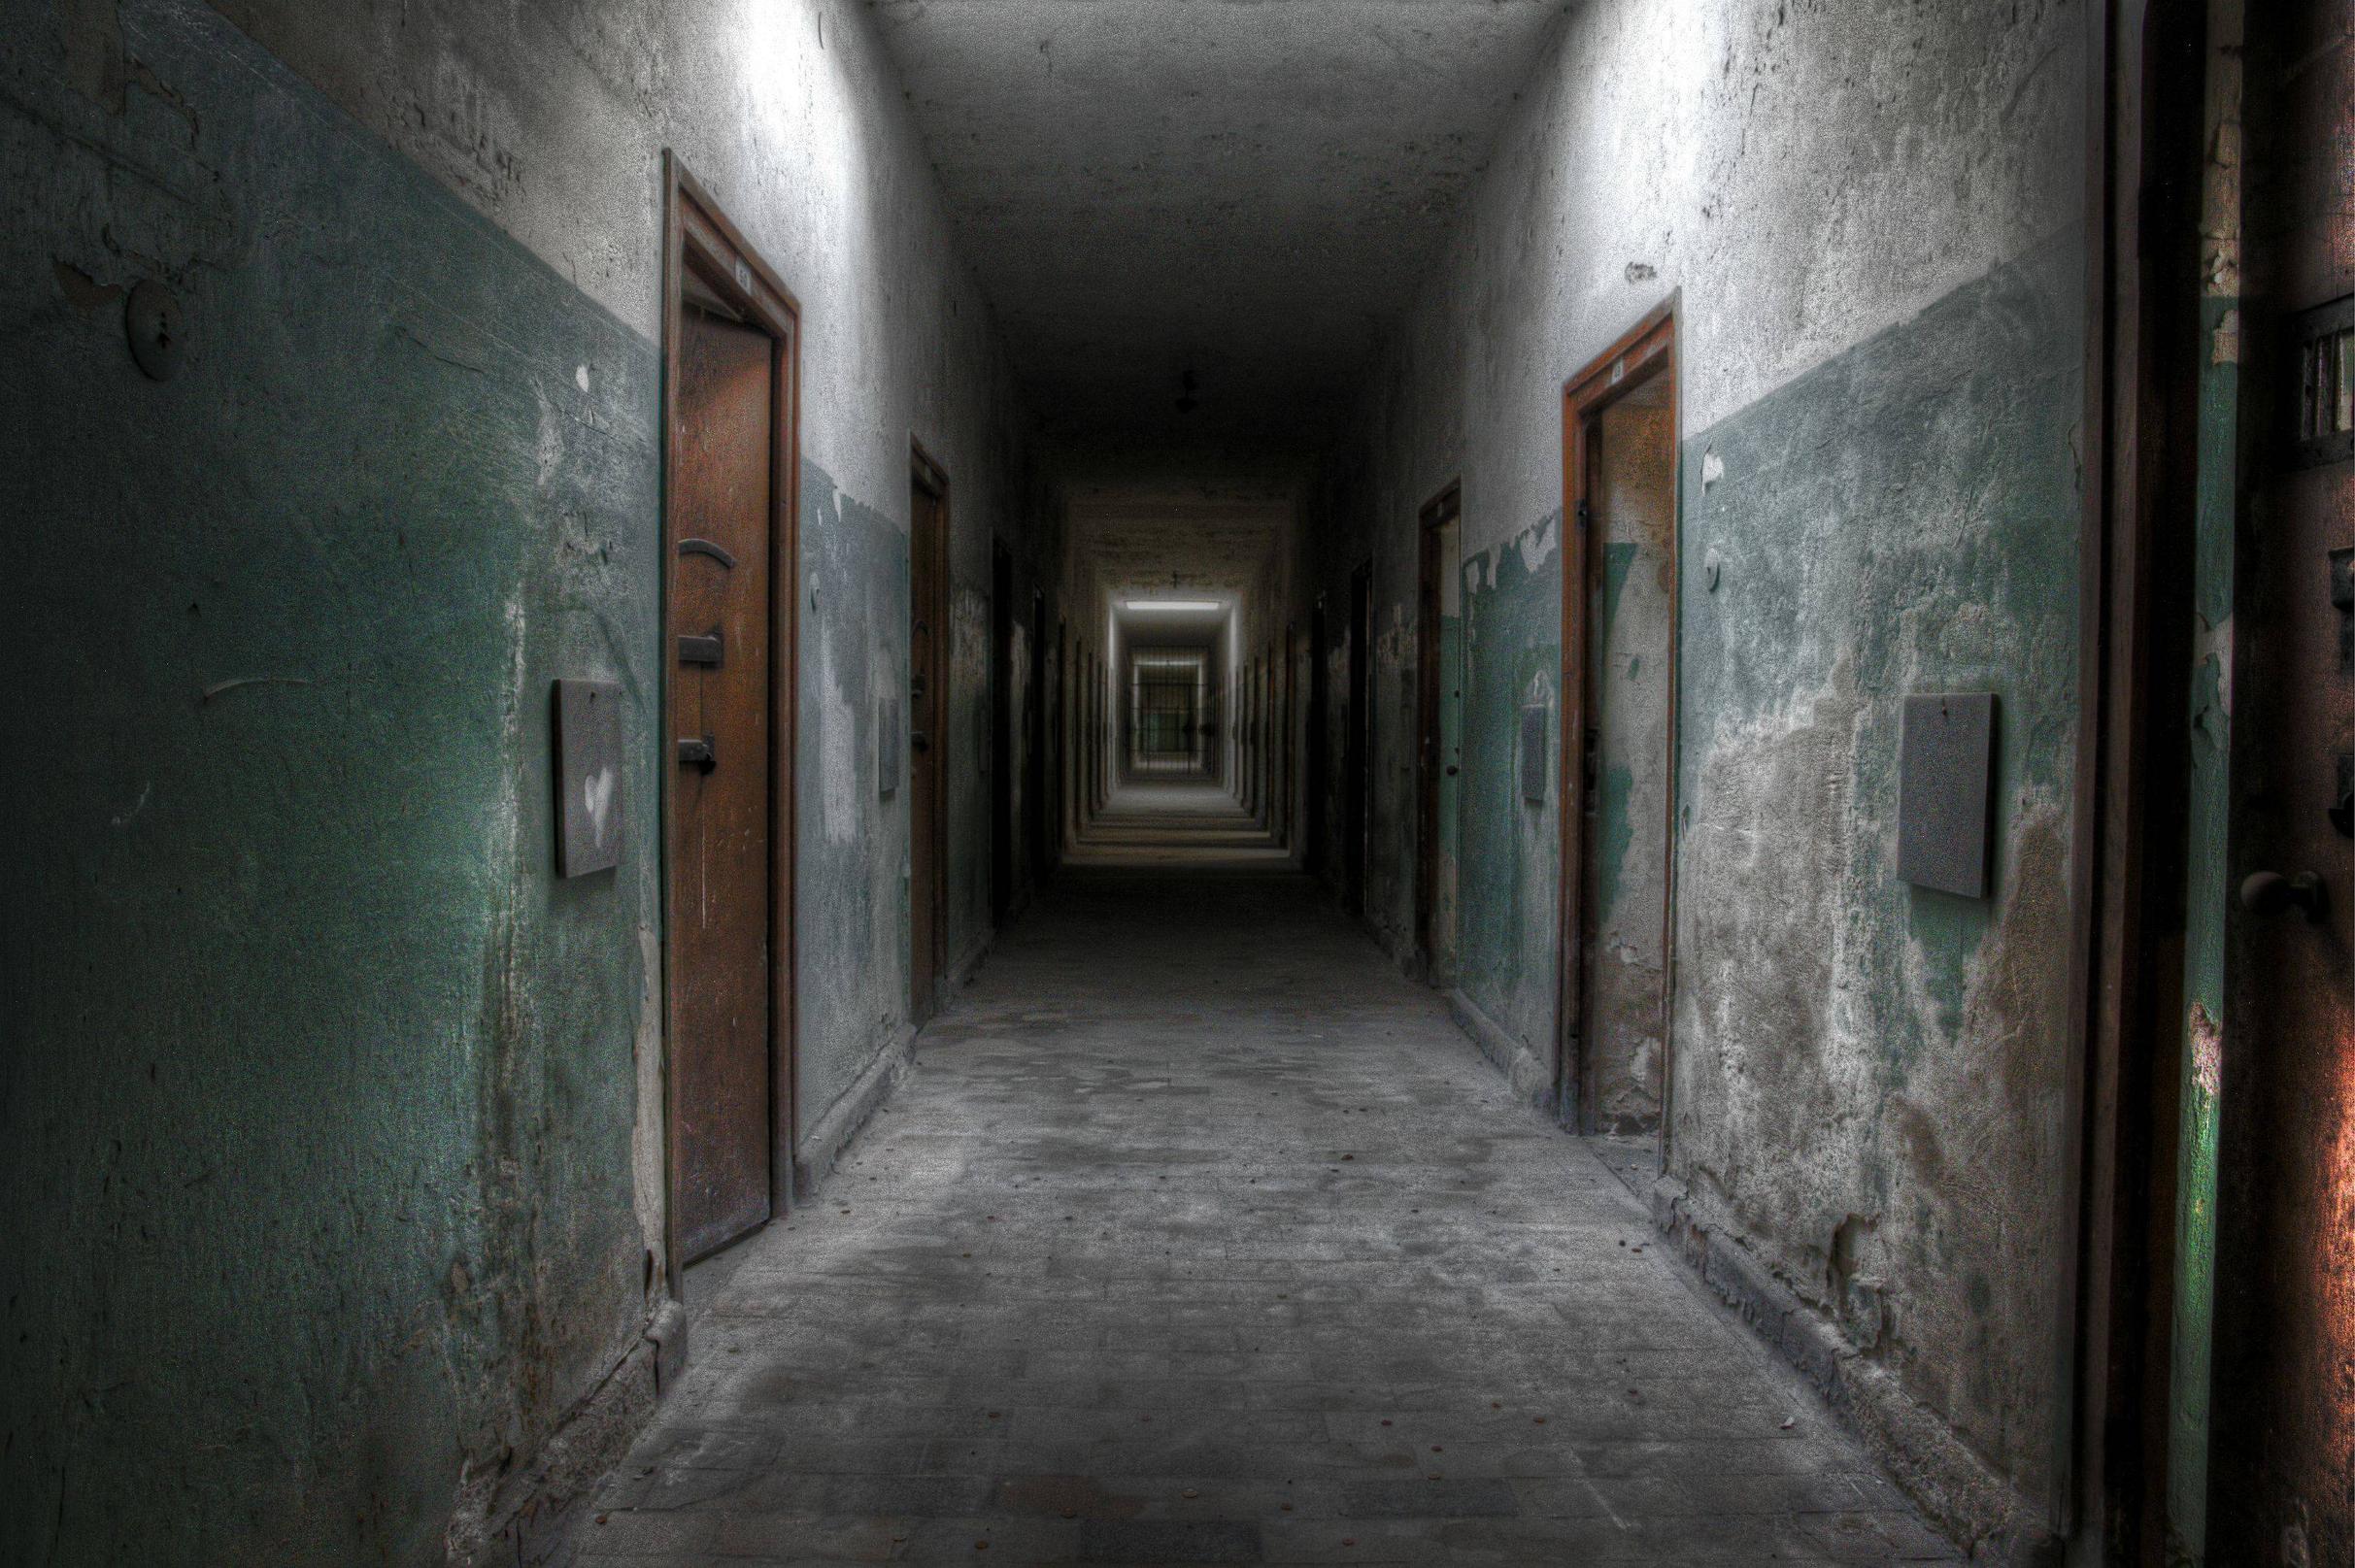 An eerie looking Hallway and cells of 